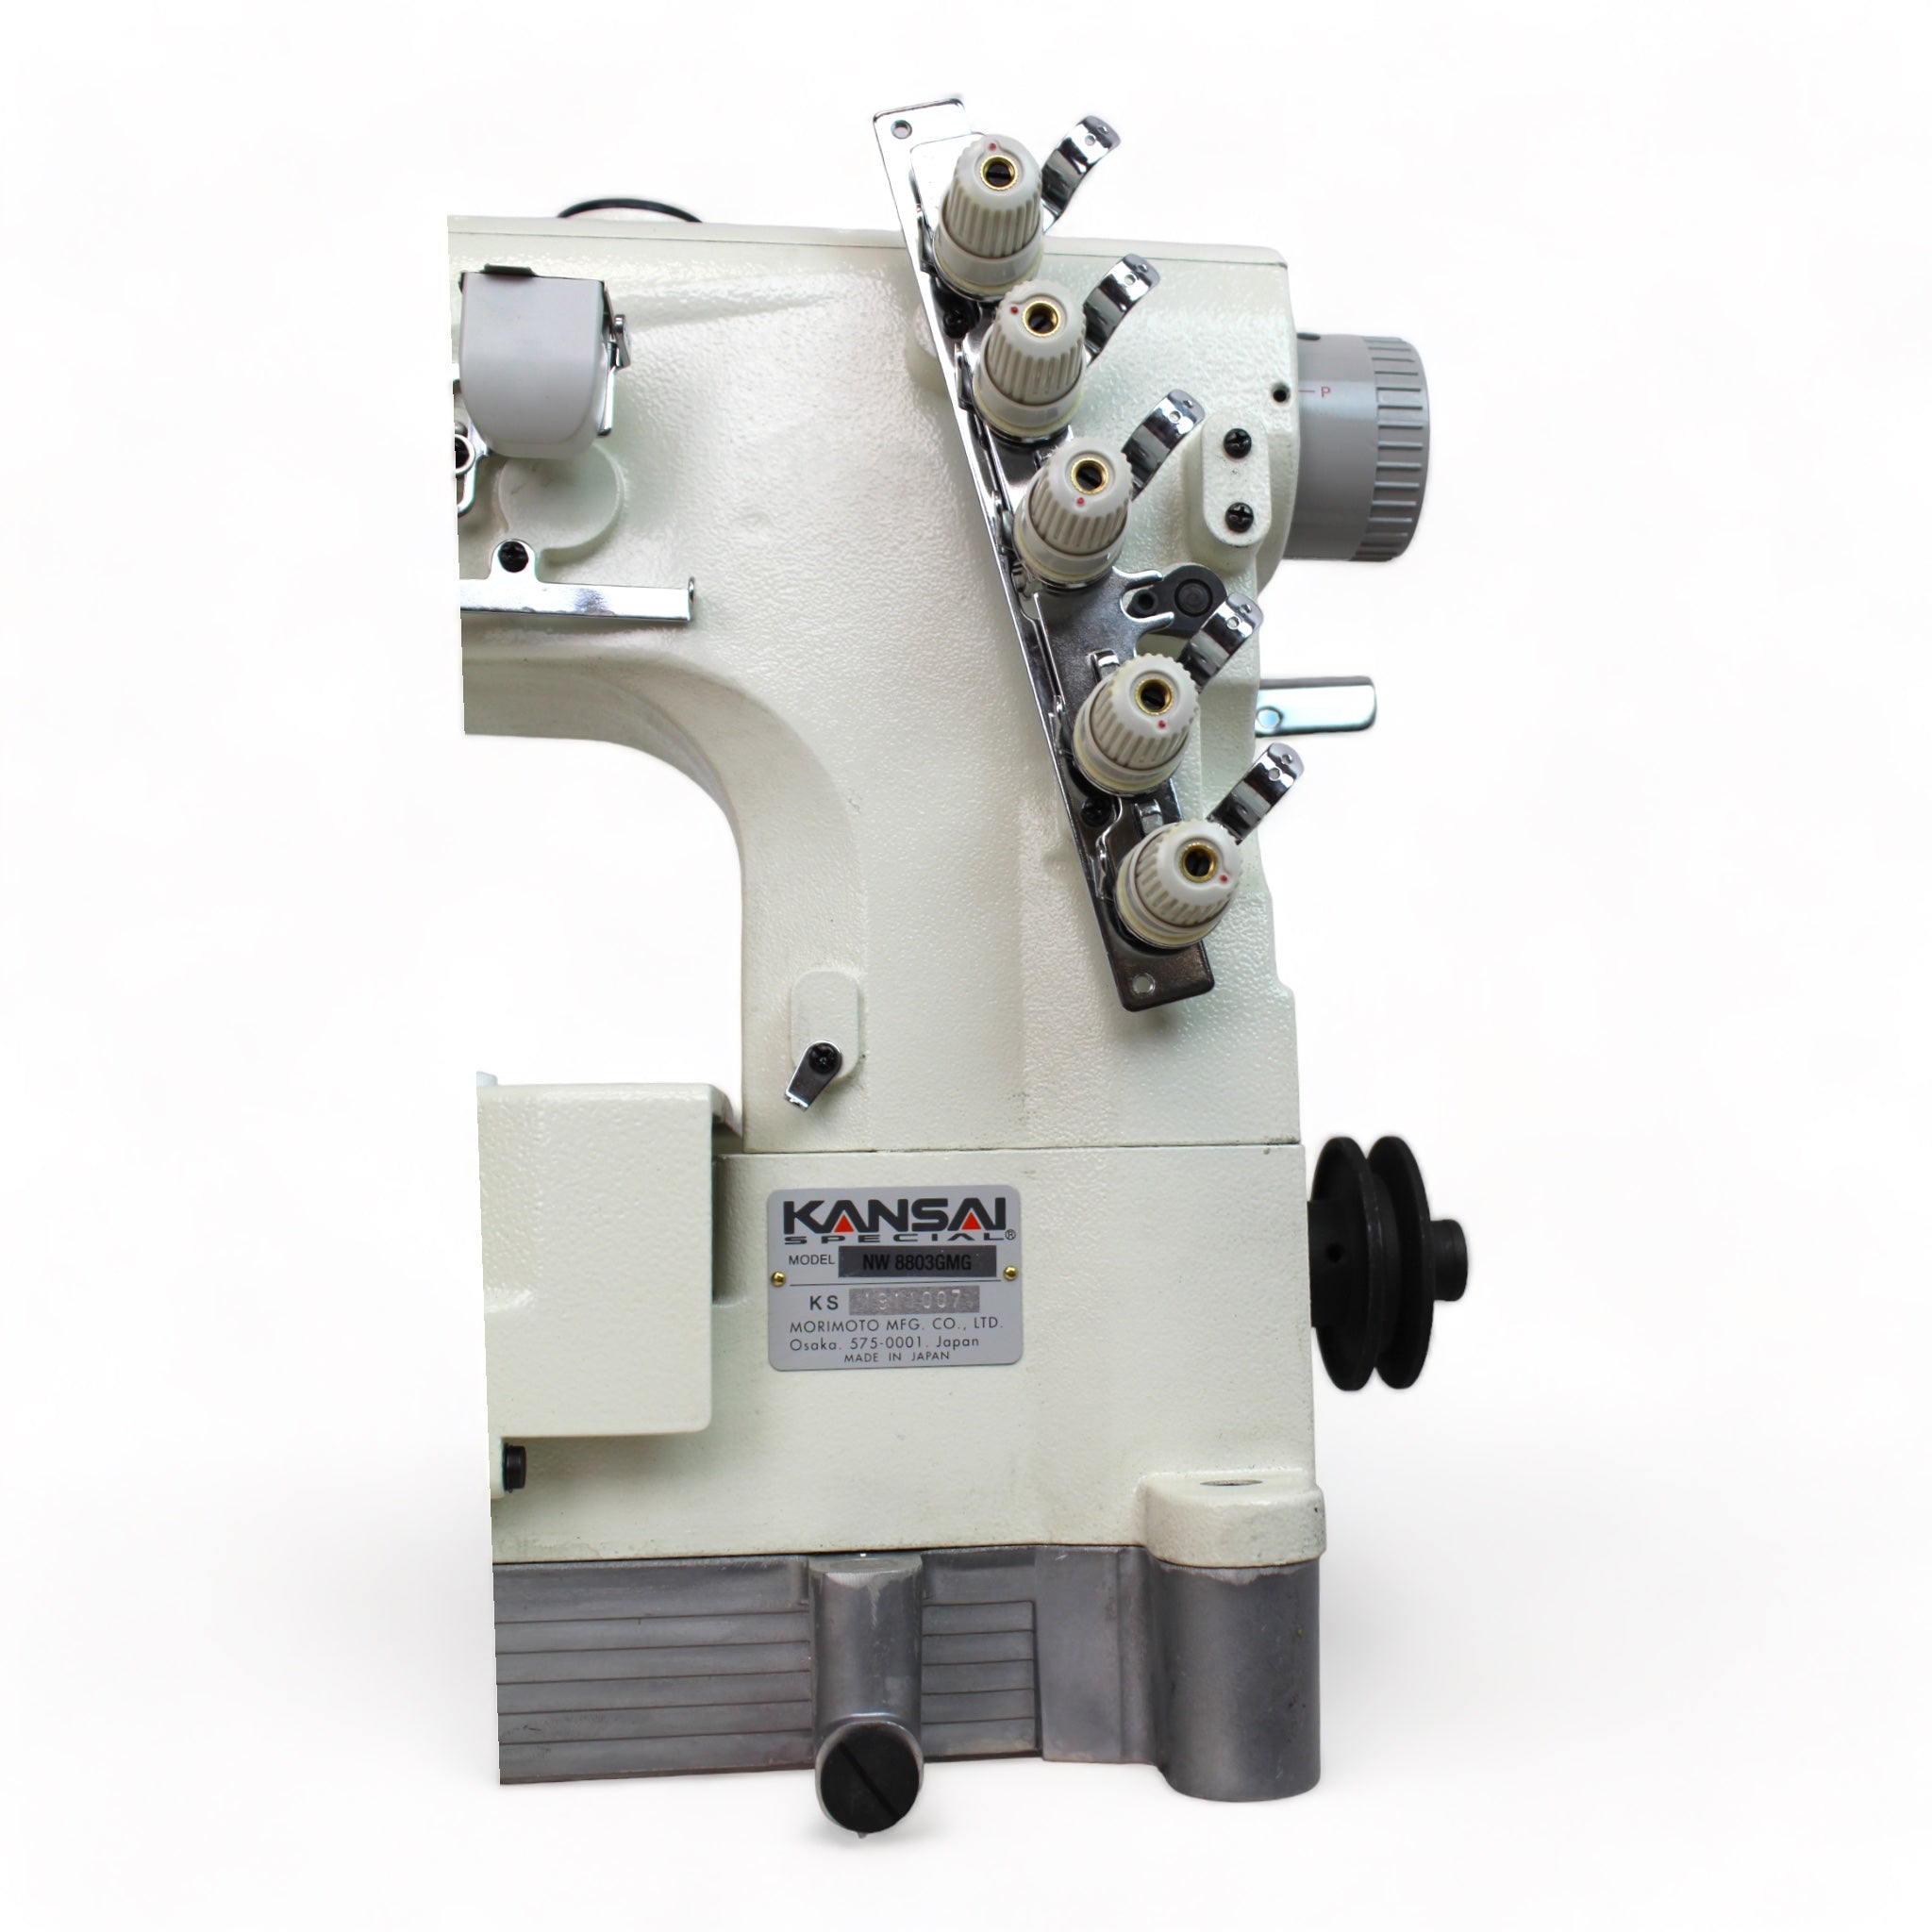 KANSAI SPECIAL NW-8803GMG 1/4 3 Needle Flatbed Coverstitch Industrial Sewing Machine Assembled with Servo Motor, Fully Submerged Table Setup Included